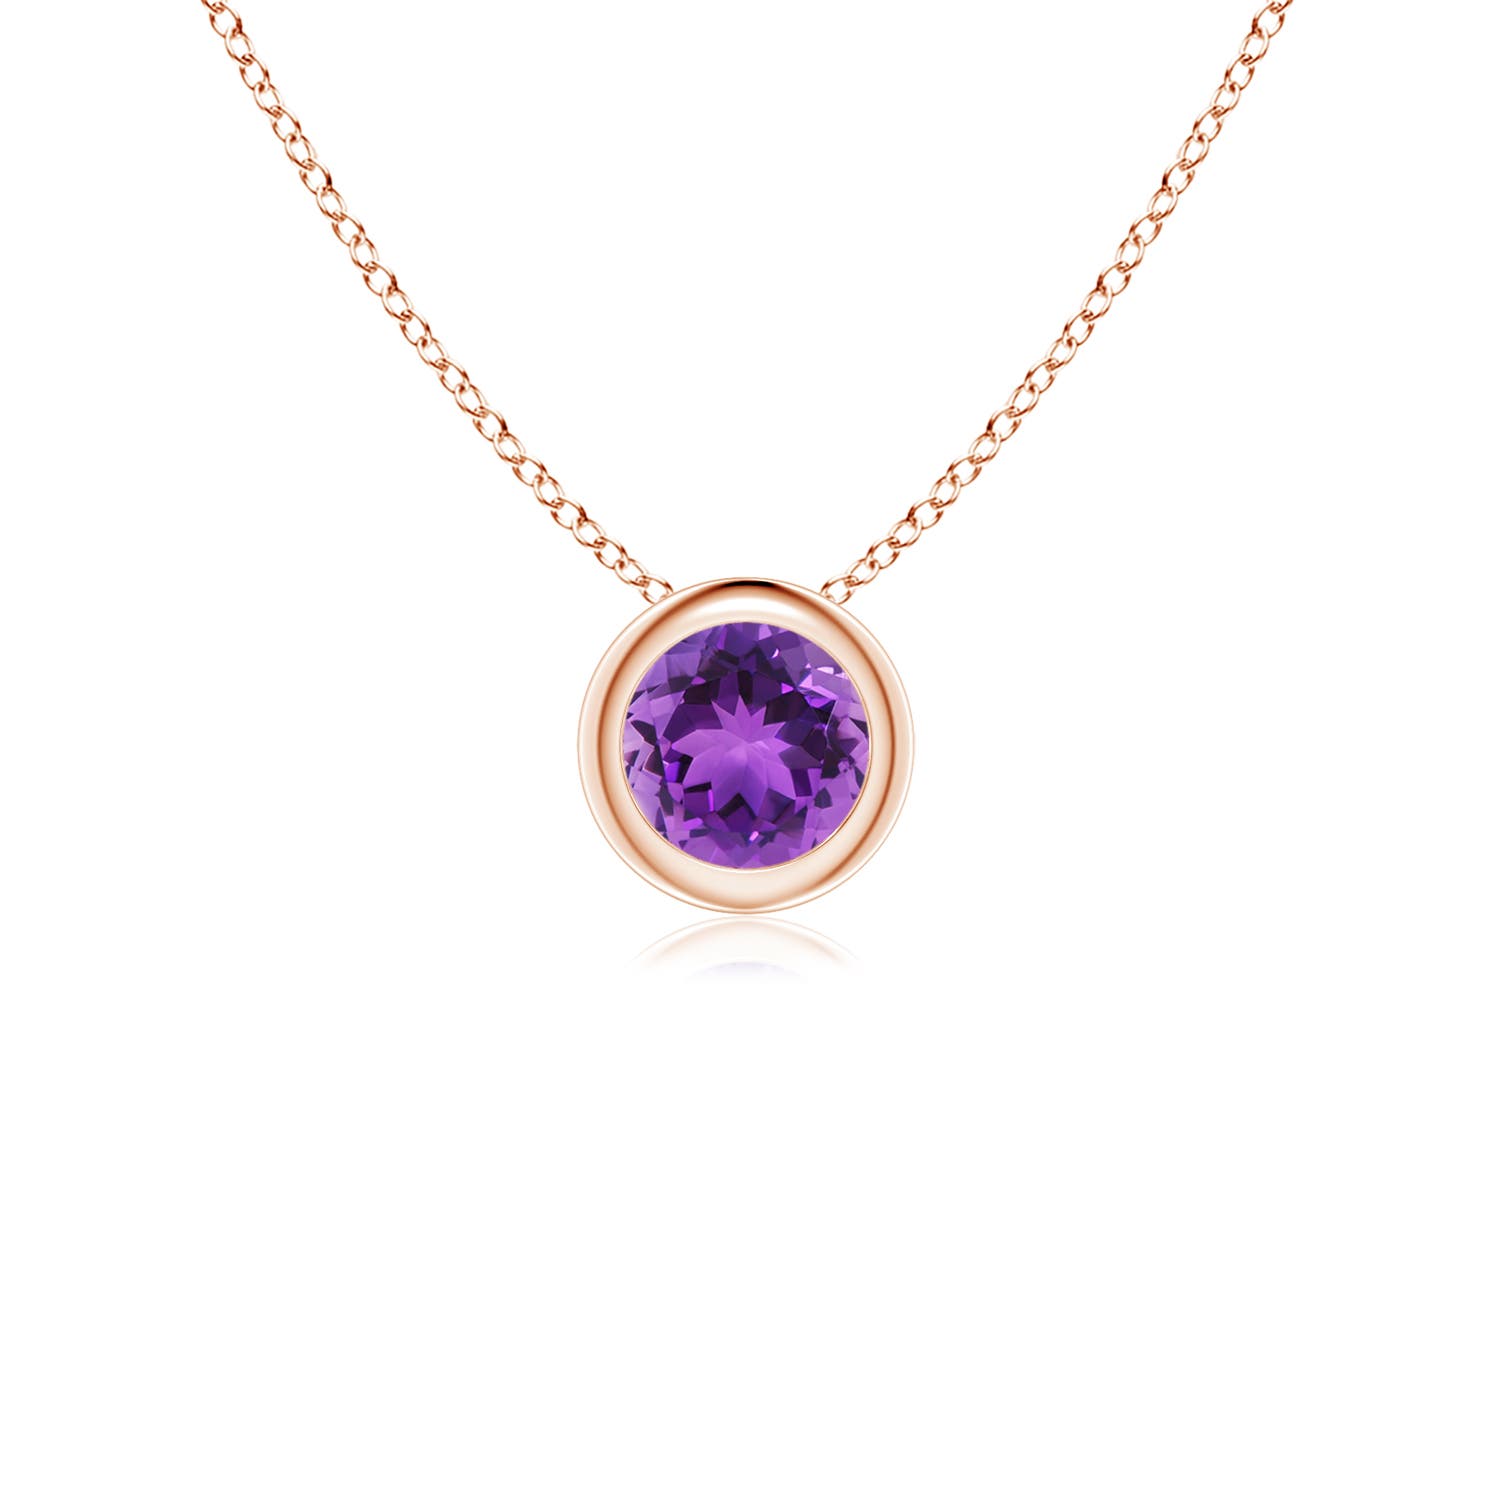 AAA - Amethyst / 0.25 CT / 14 KT Rose Gold